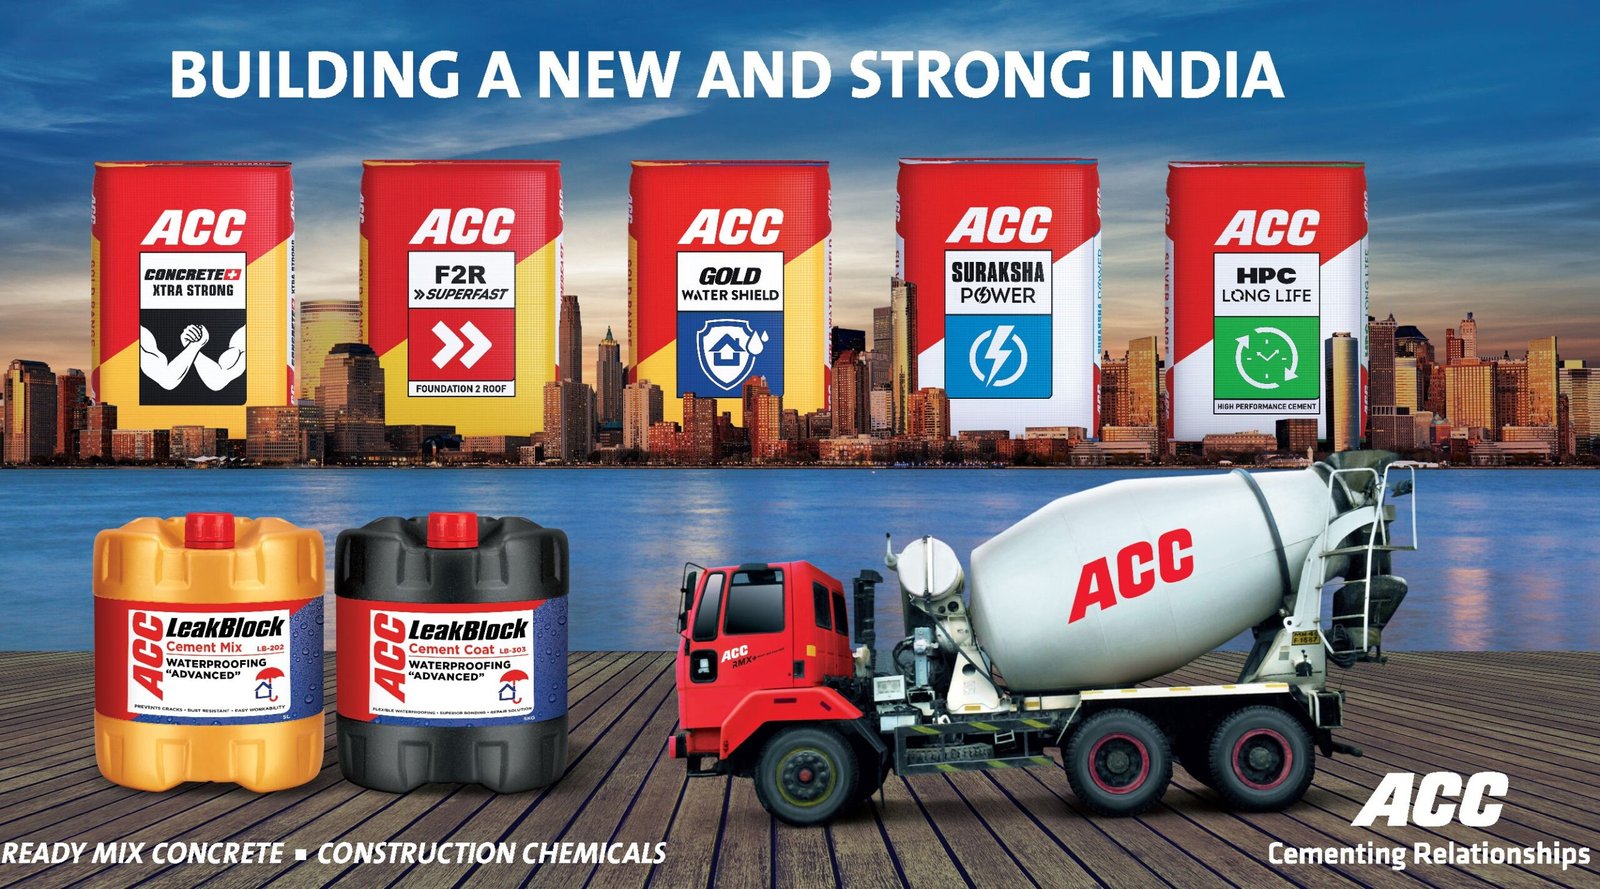 Marketing Strategy of ACC Cements